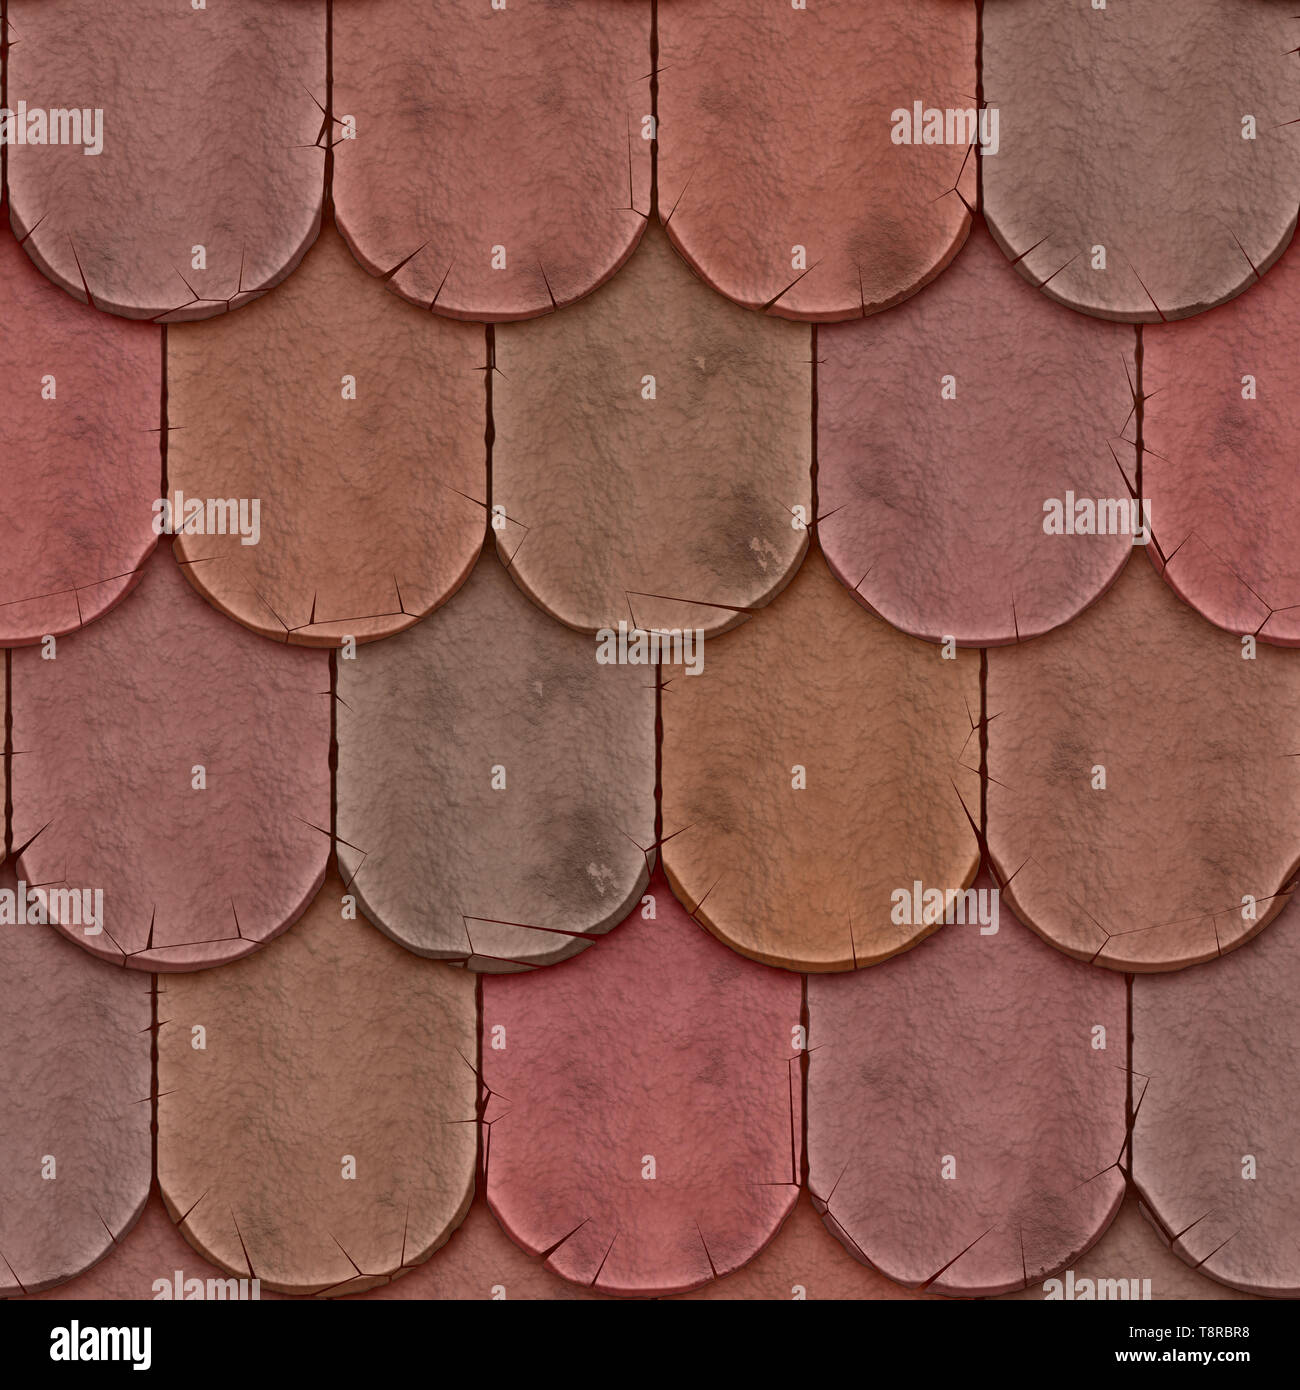 Clay Shingles Roofing Seamless Texture Tile Stock Photo